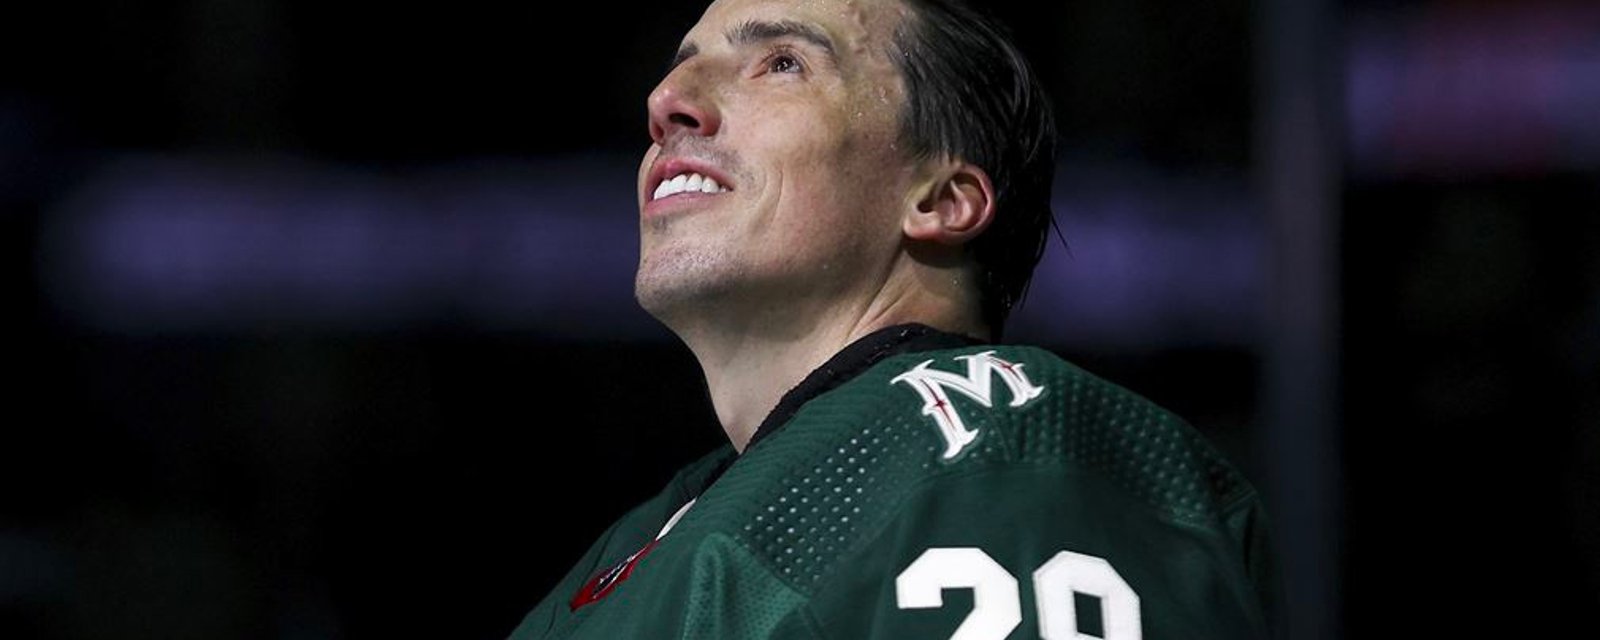 Huge update on Marc-Andre Fleury’s possible imminent trade!